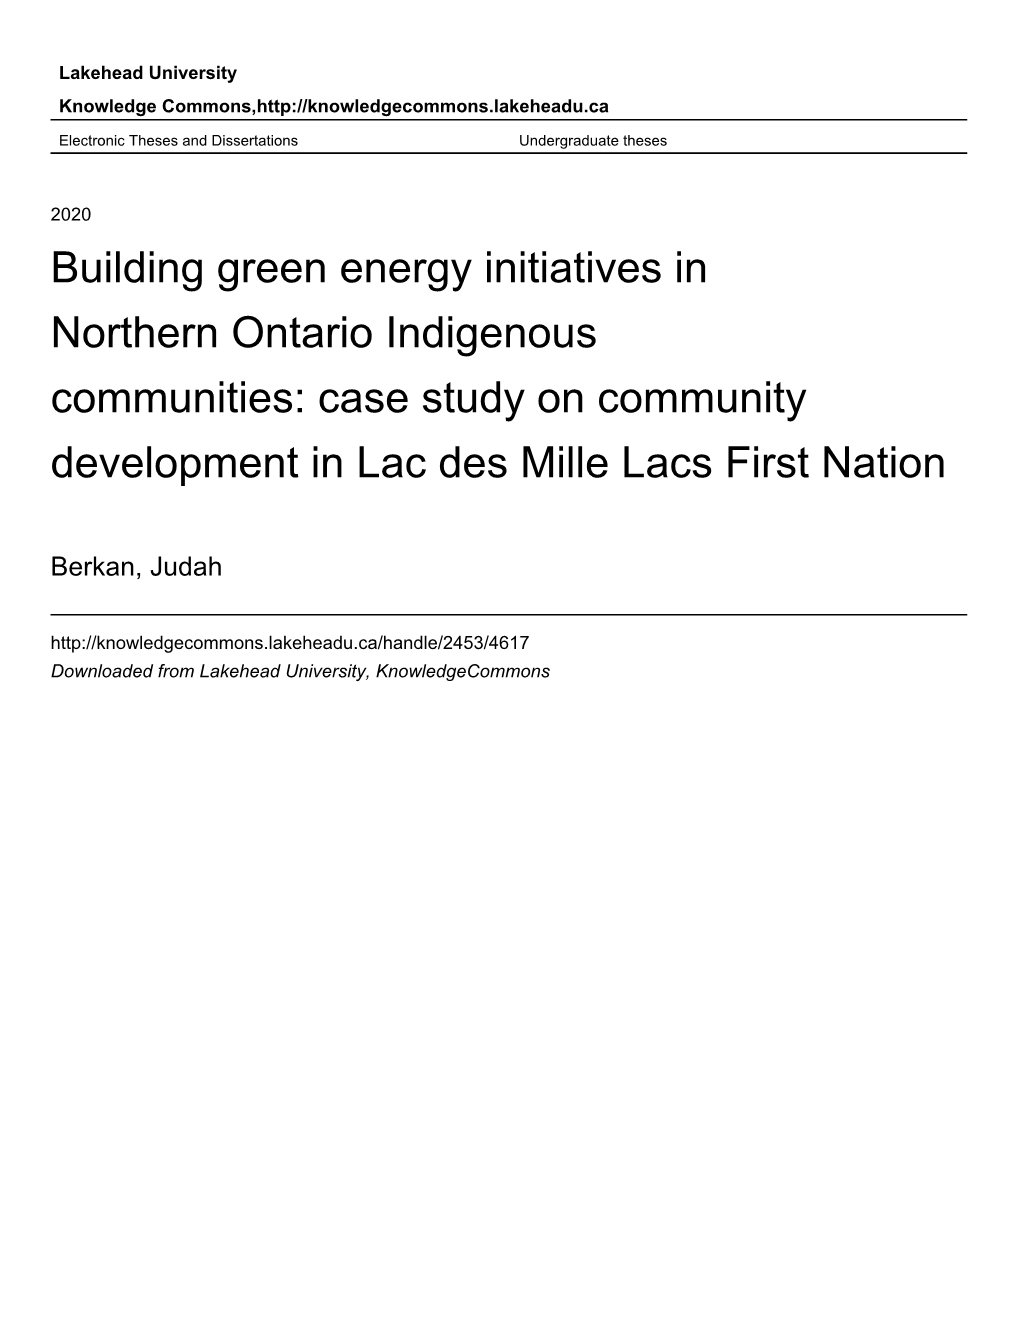 Building Green Energy Initiatives in Northern Ontario Indigenous Communities: Case Study on Community Development in Lac Des Mille Lacs First Nation